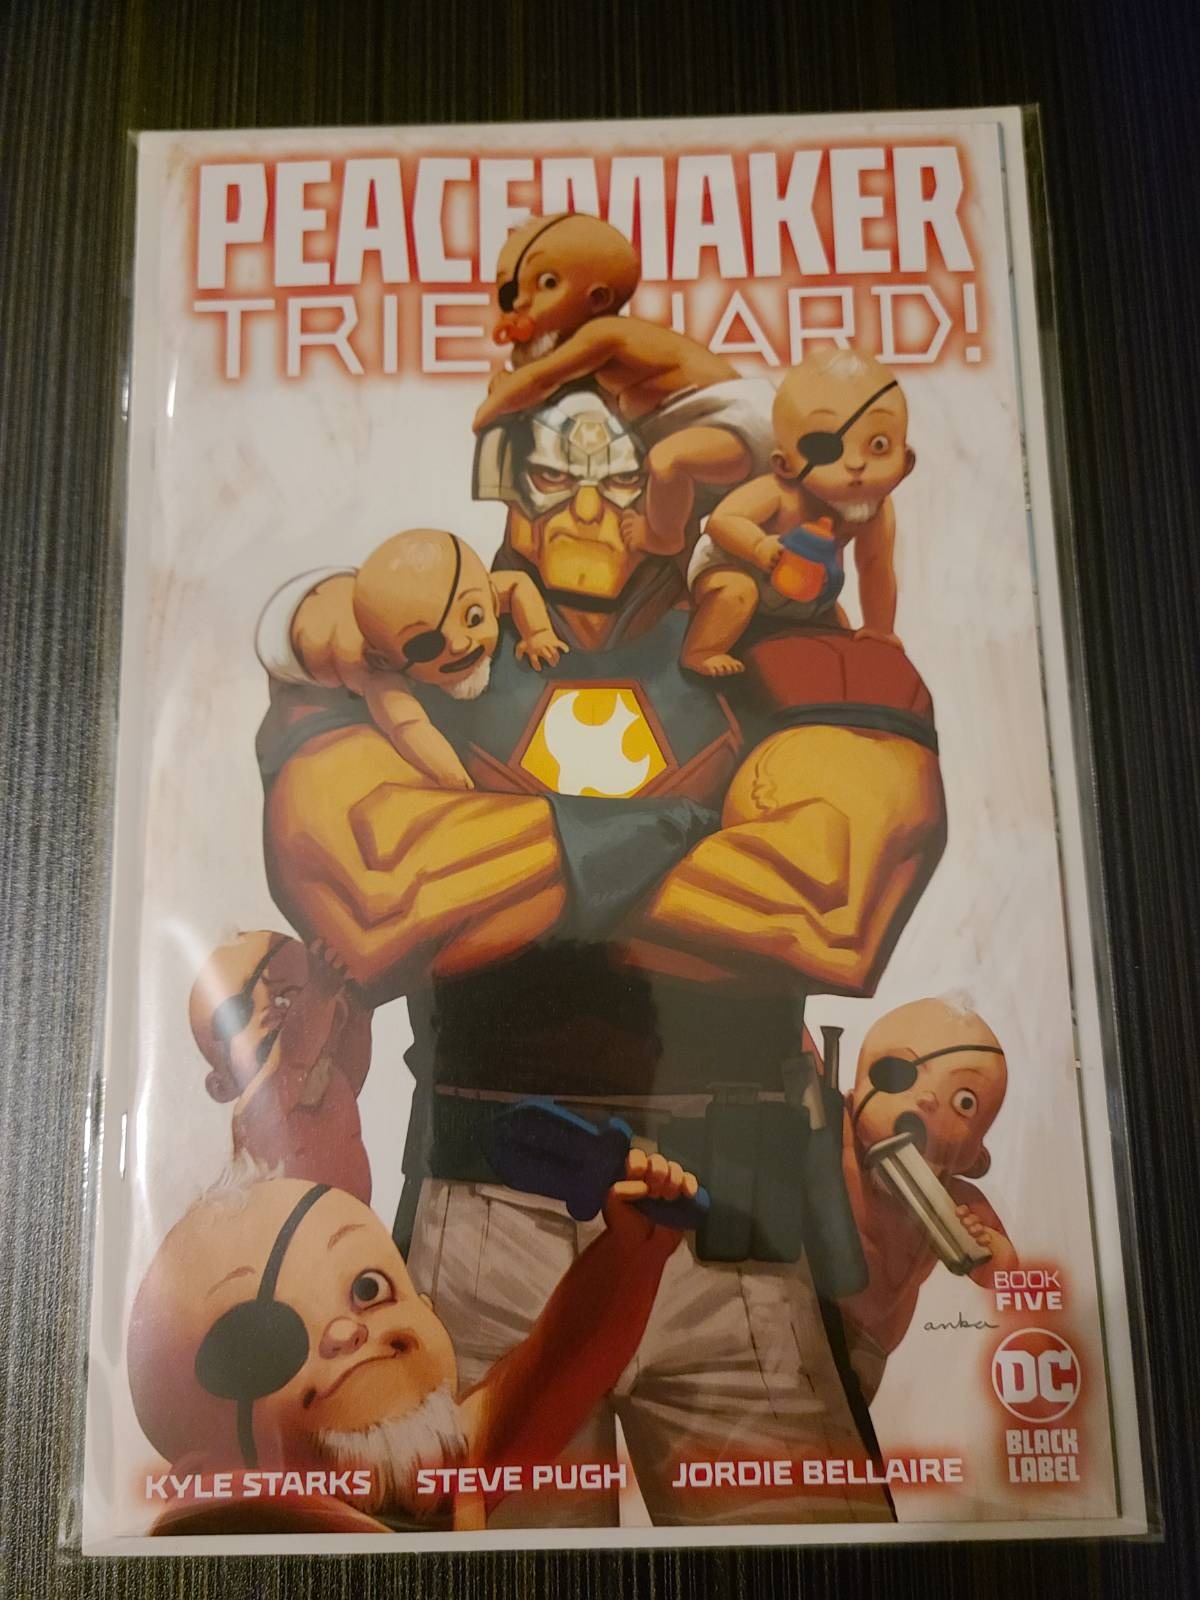 Peacemaker Tries Hard #5 (of 6) Cover A Kris Anka (MR)